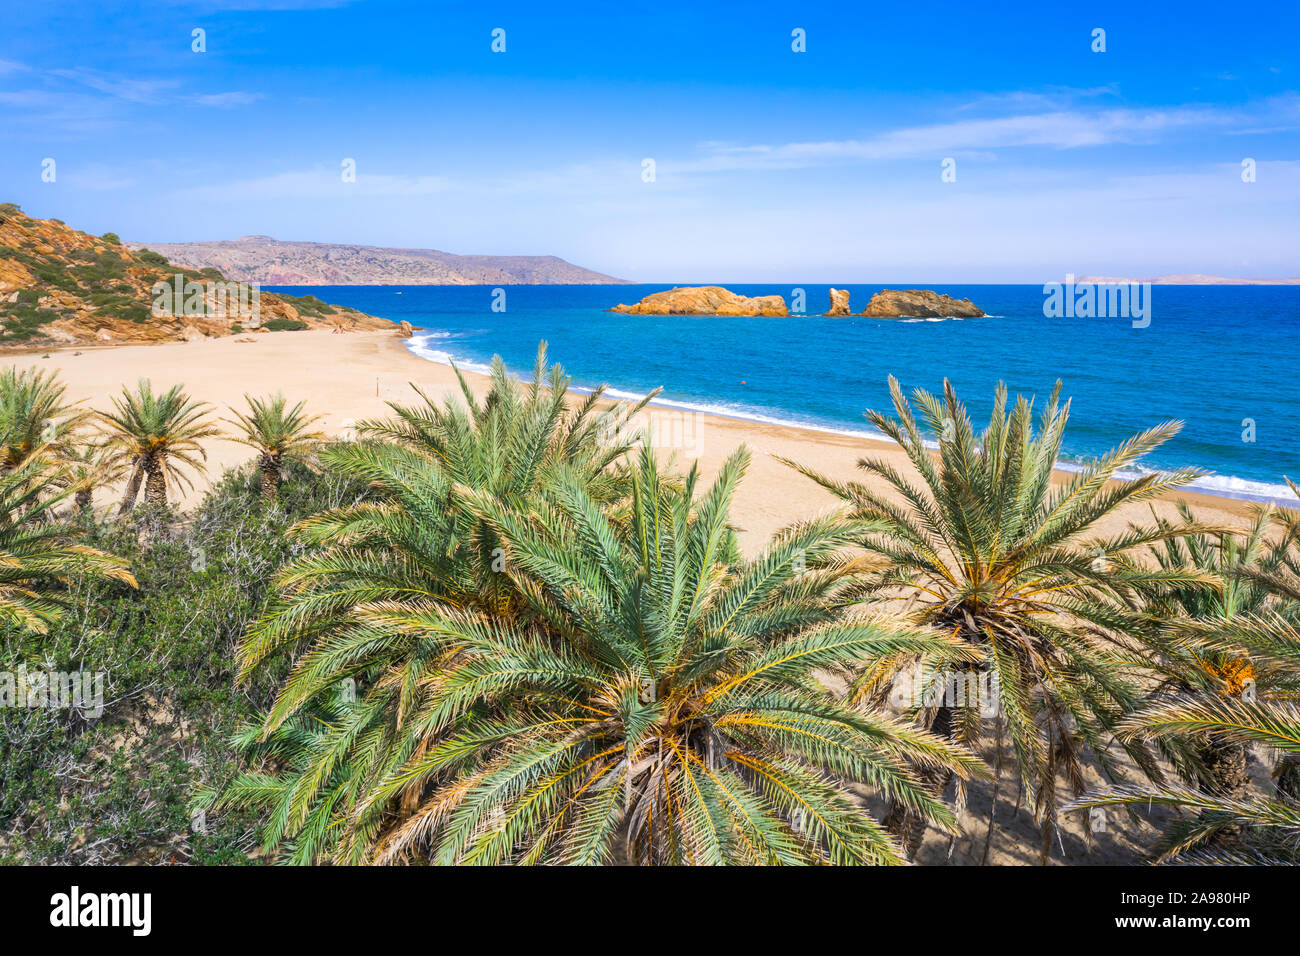 Scenic landscape of palm trees, turquoise water and tropical beach, Vai, Crete, Greece. Stock Photo